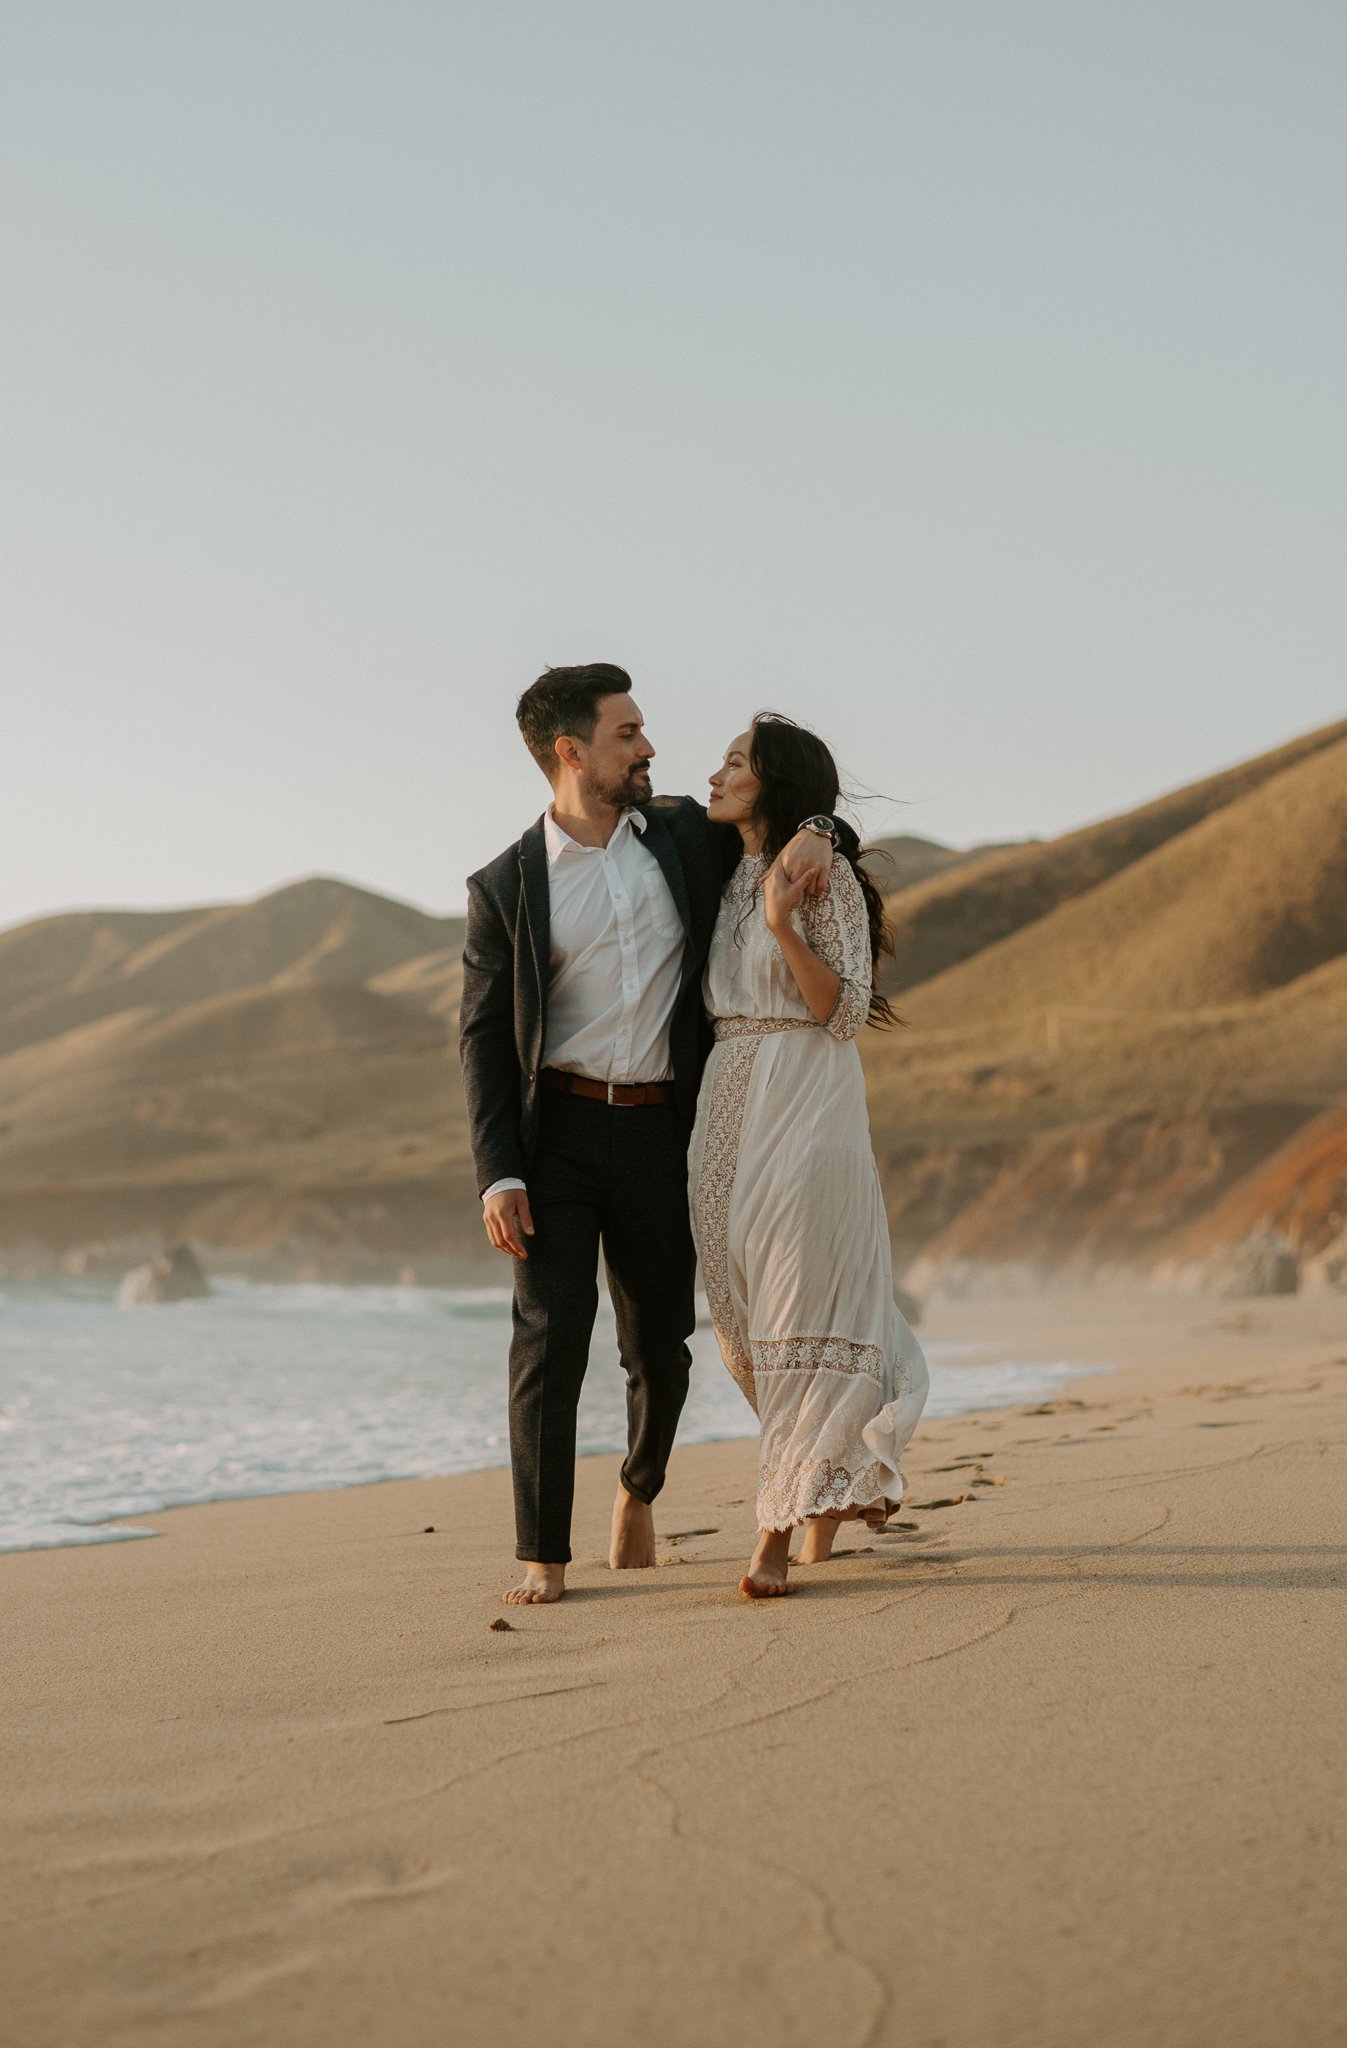 Newly engaged couple walking on beach looking at each other Big Sur